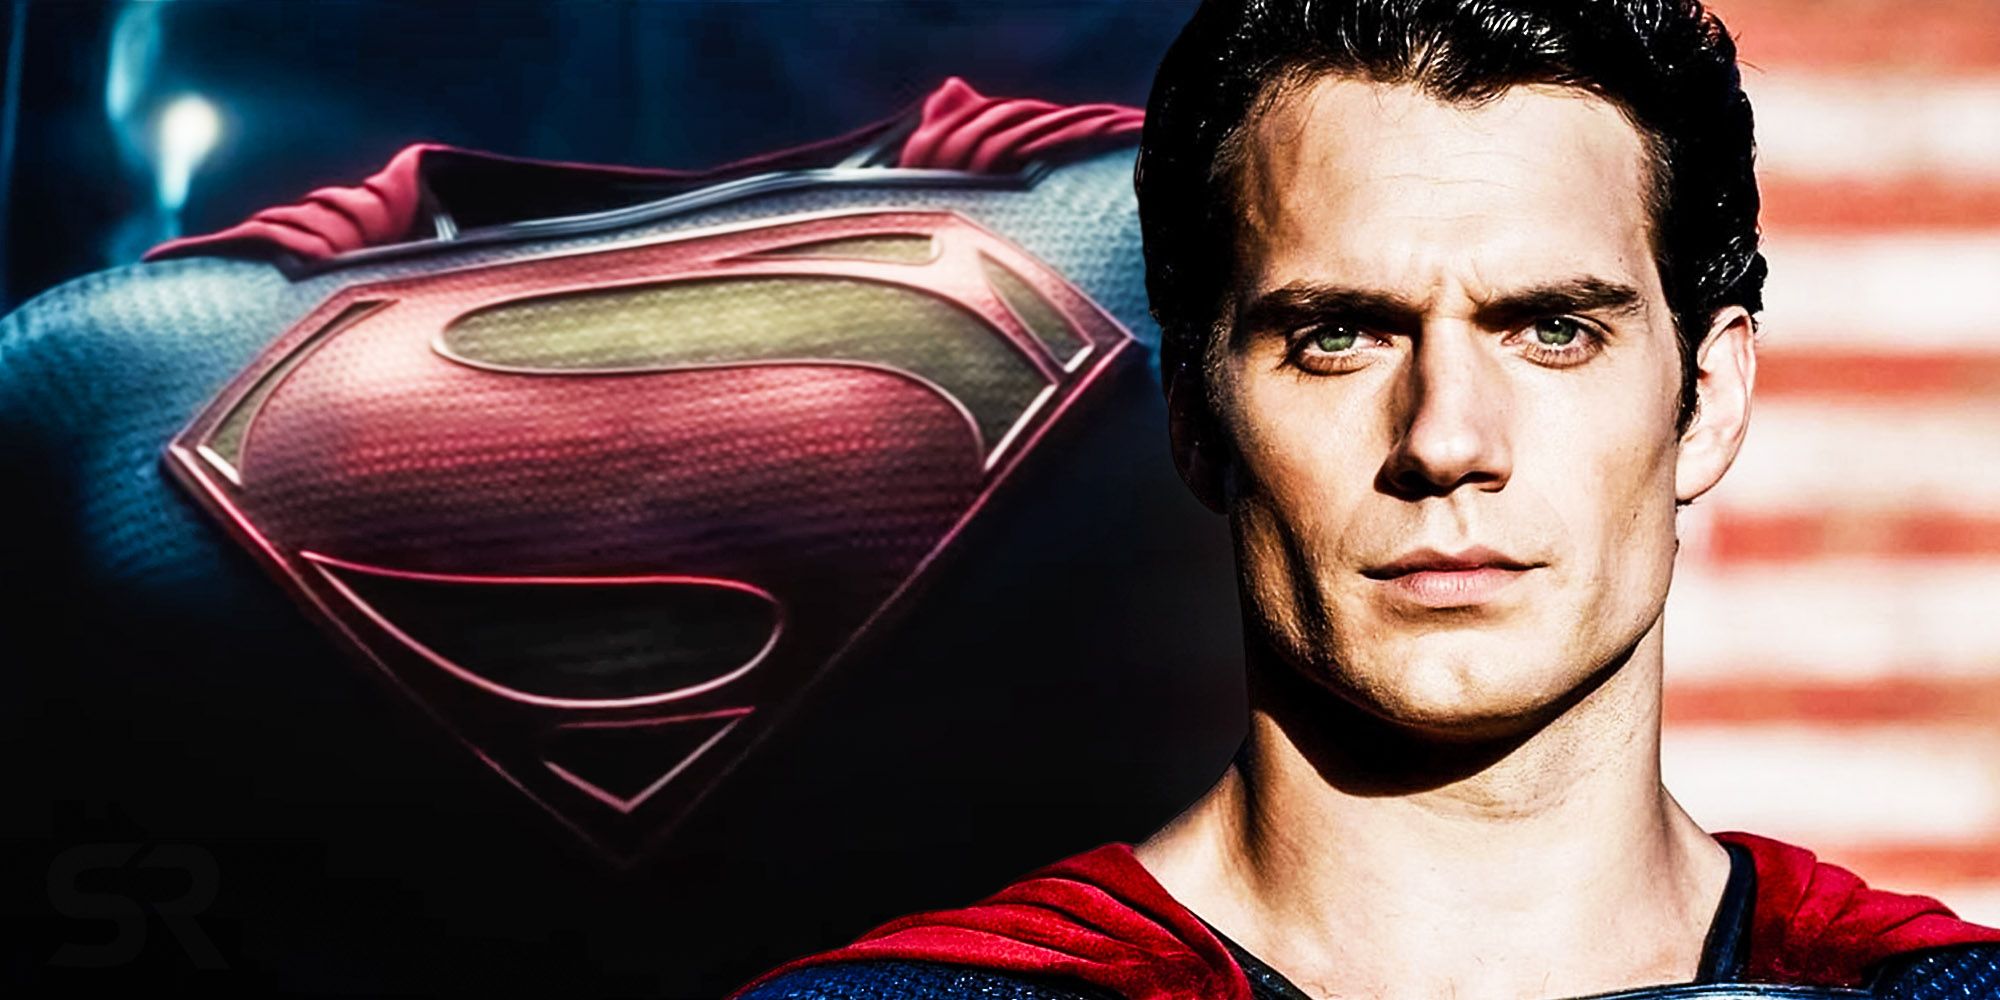 Man of Steel Villain Returns In The Flash: Will Henry Cavill's Superman  Also Appear?